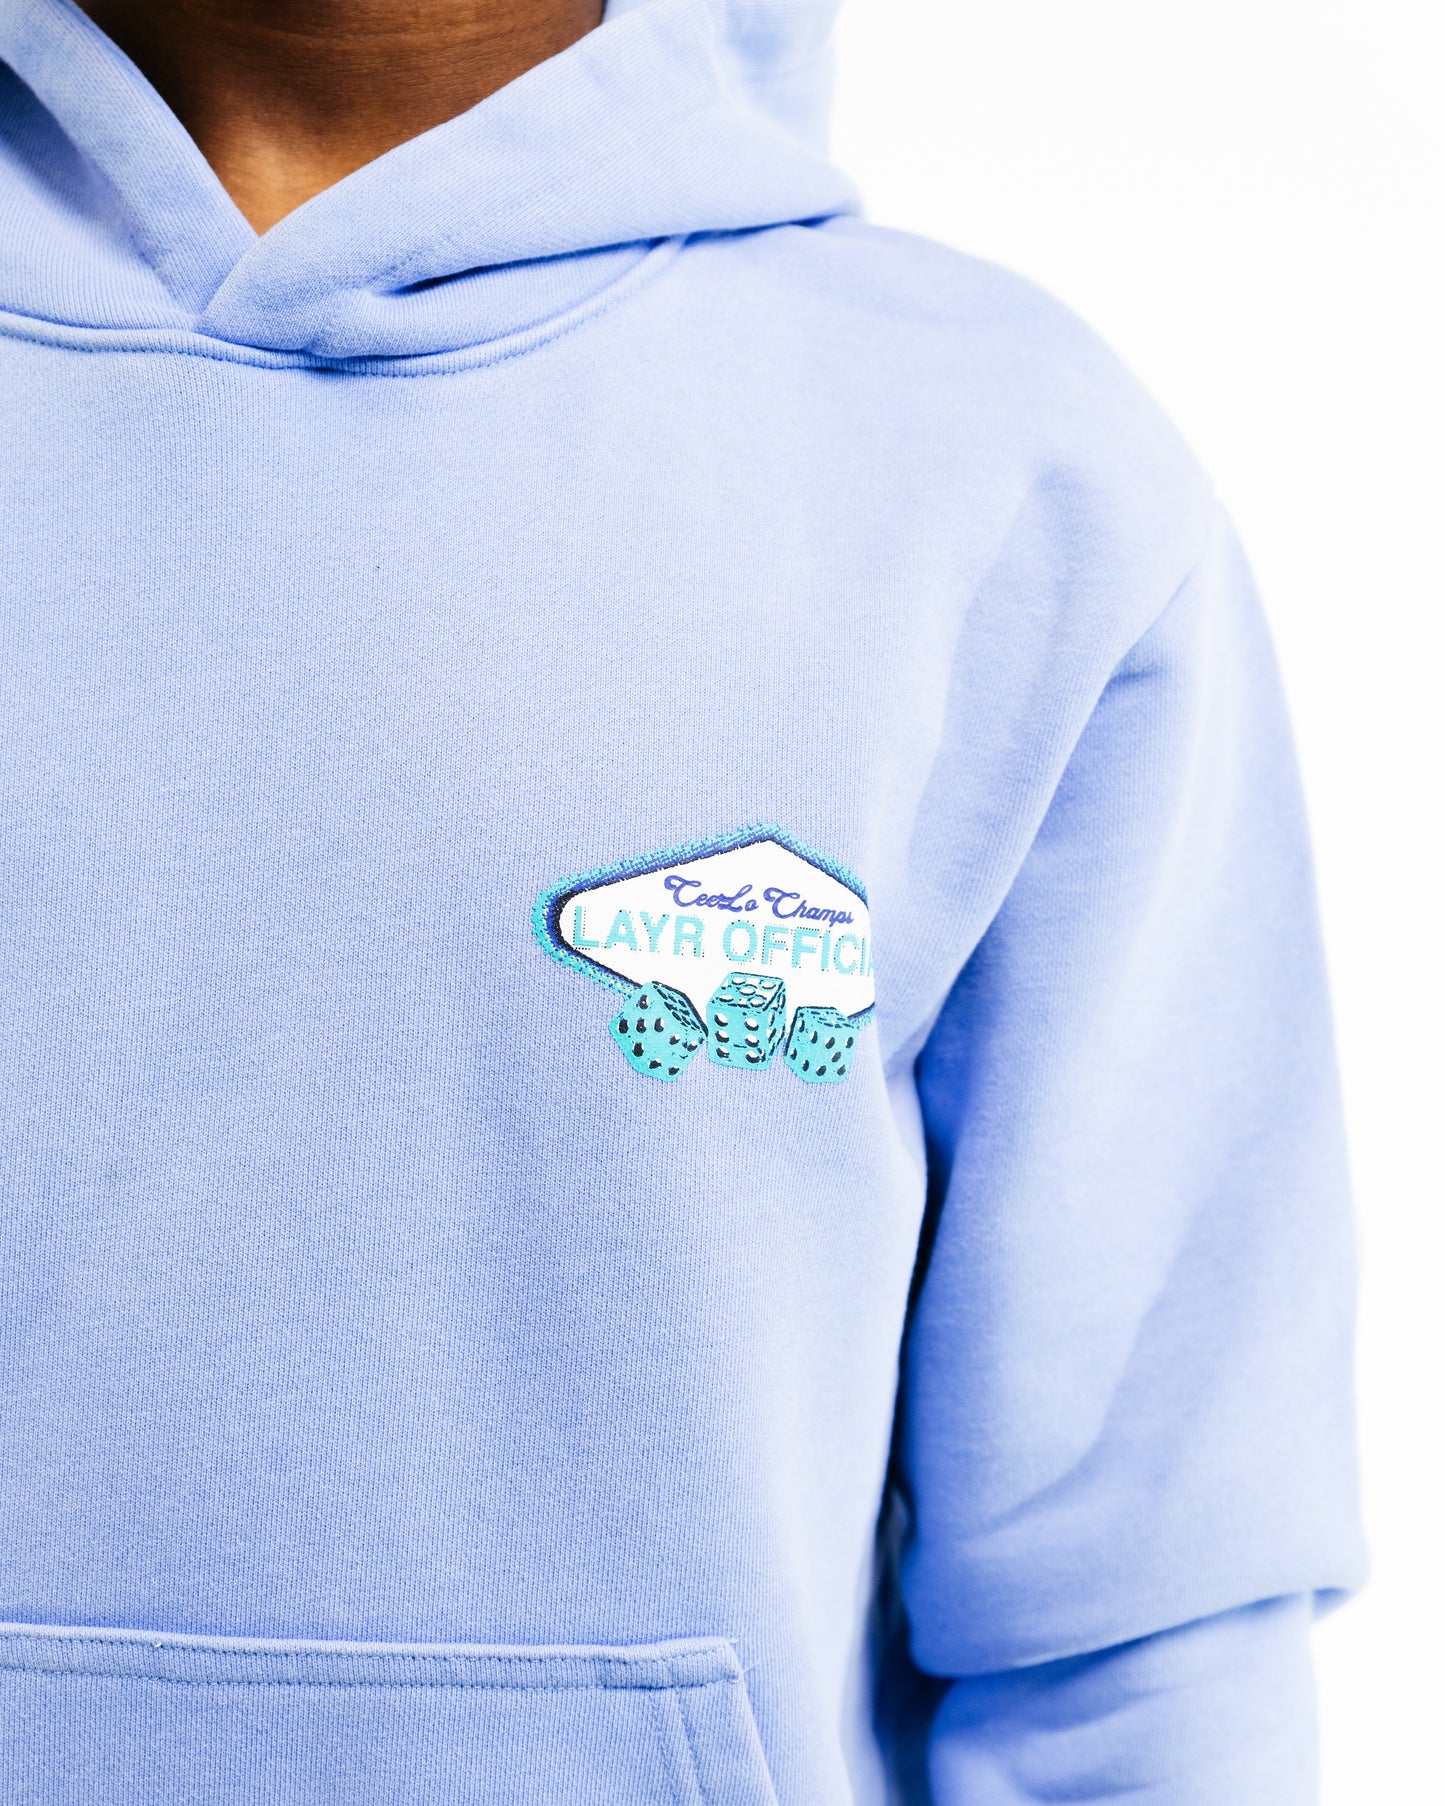 Cee Lo Pullover Hoodie, Blue